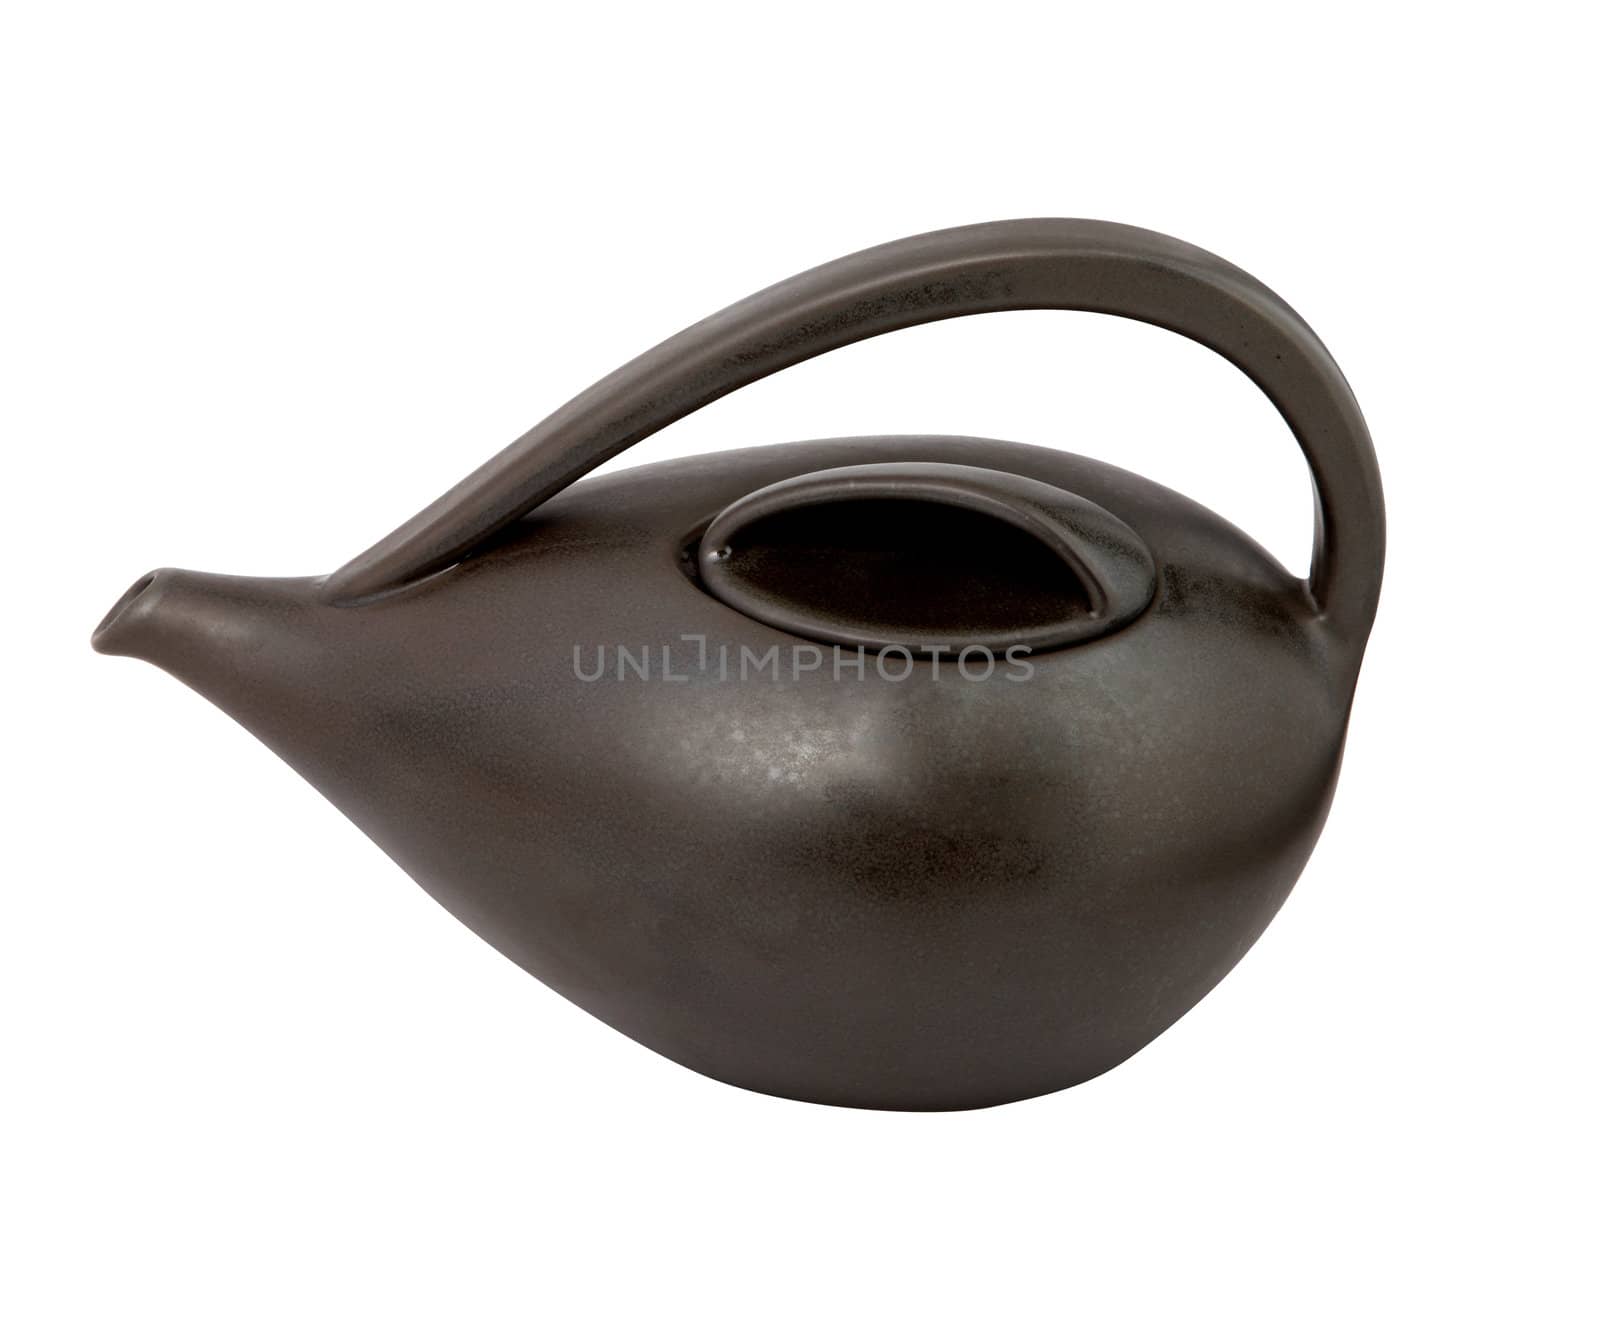 Brown ceramic teapot on white background. With clipping path.